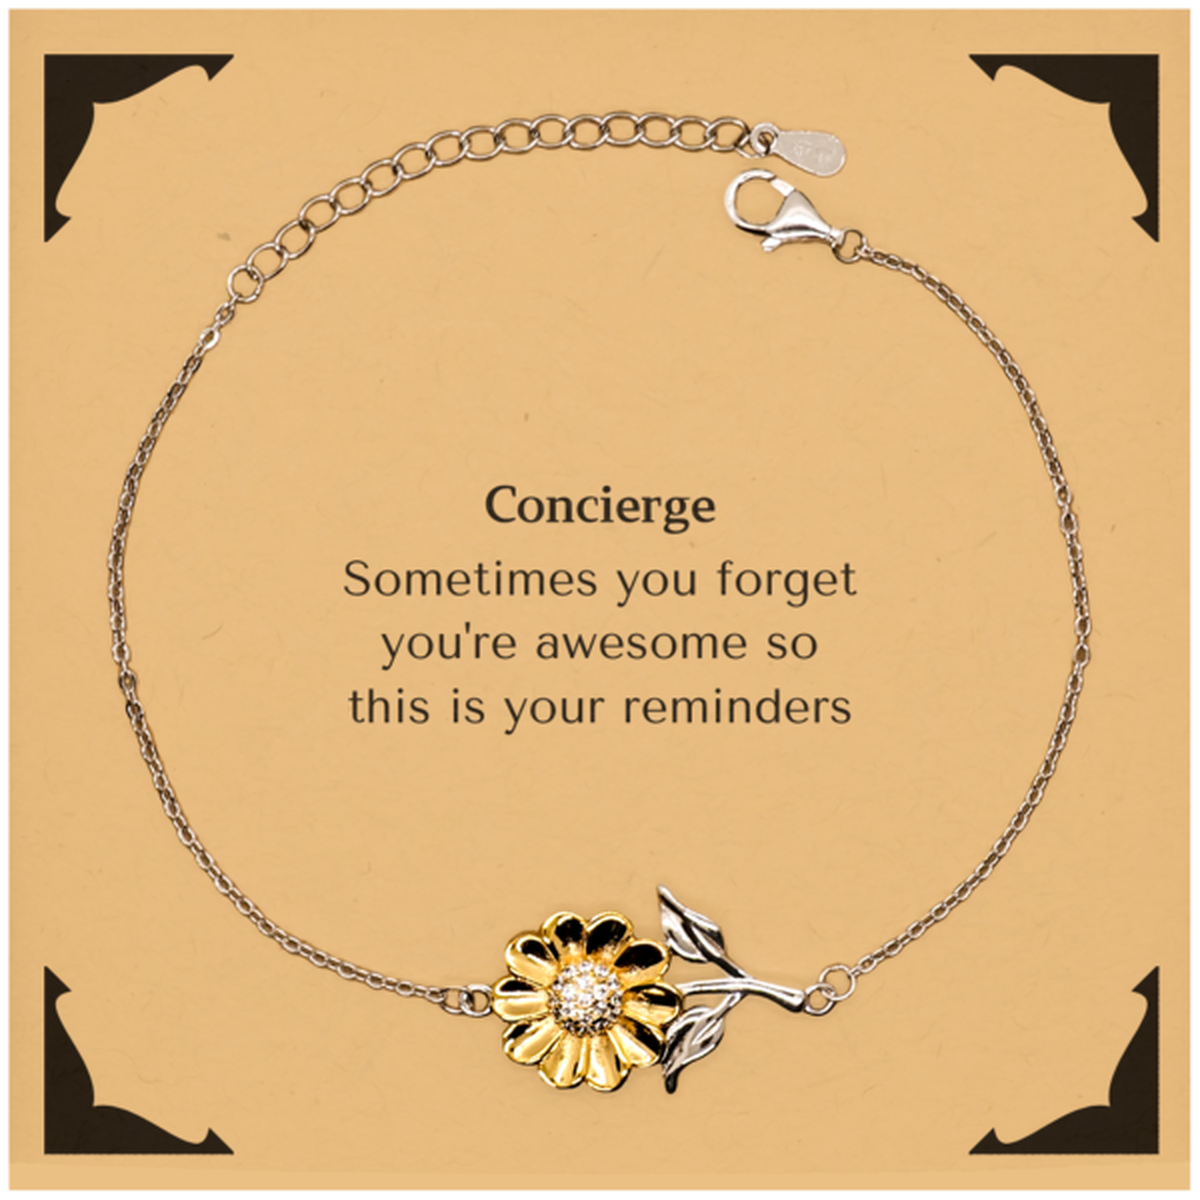 Sentimental Concierge Sunflower Bracelet, Concierge Sometimes you forget you're awesome so this is your reminders, Graduation Christmas Birthday Gifts for Concierge, Men, Women, Coworkers